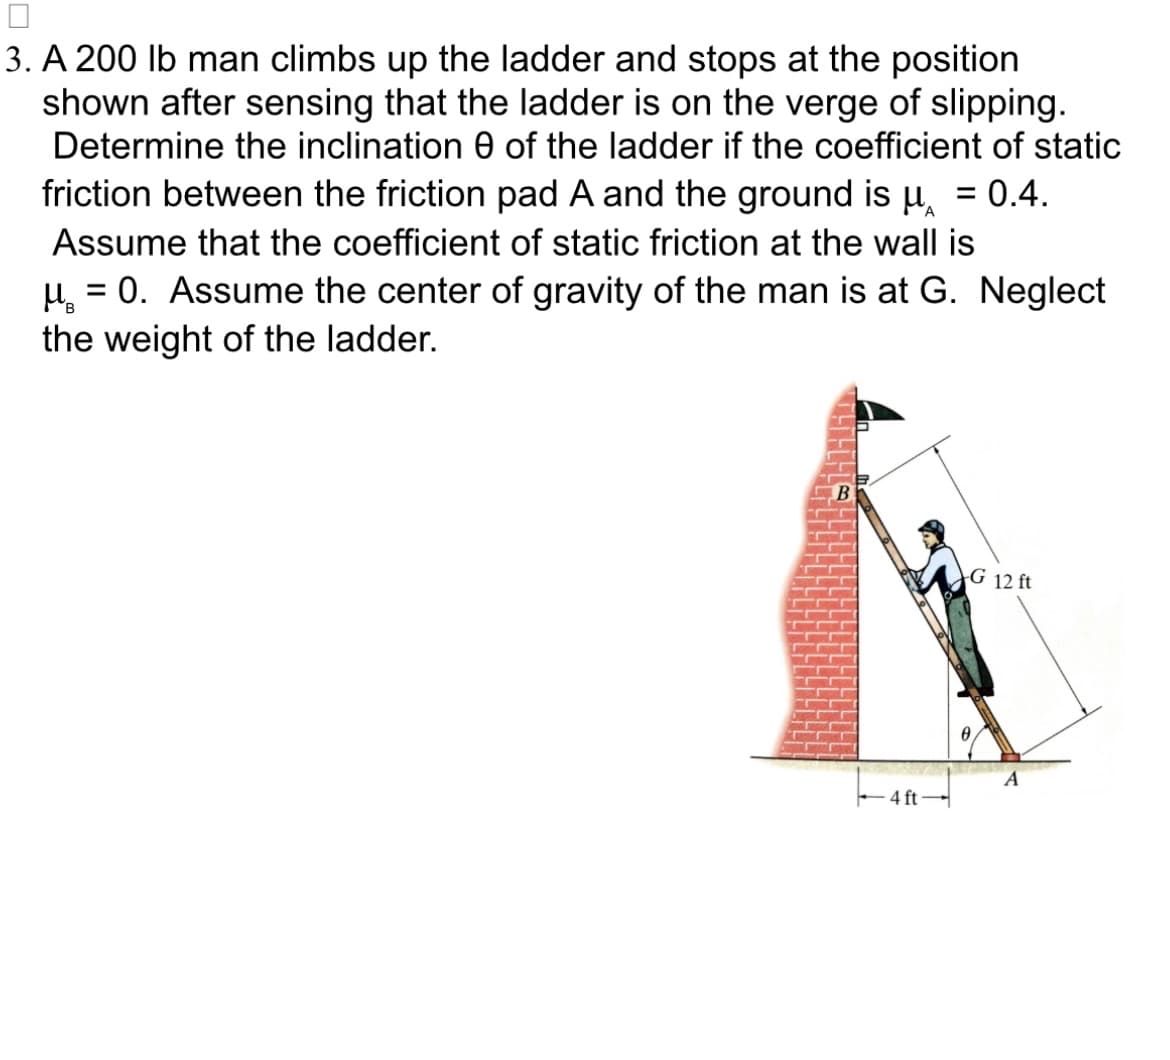 3. A 200 lb man climbs up the ladder and stops at the position
shown after sensing that the ladder is on the verge of slipping.
Determine the inclination of the ladder if the coefficient of static
friction between the friction pad A and the ground is u = 0.4.
Assume that the coefficient of static friction at the wall is
µ = 0. Assume the center of gravity of the man is at G. Neglect
the weight of the ladder.
-4 ft-
G 12 ft
A